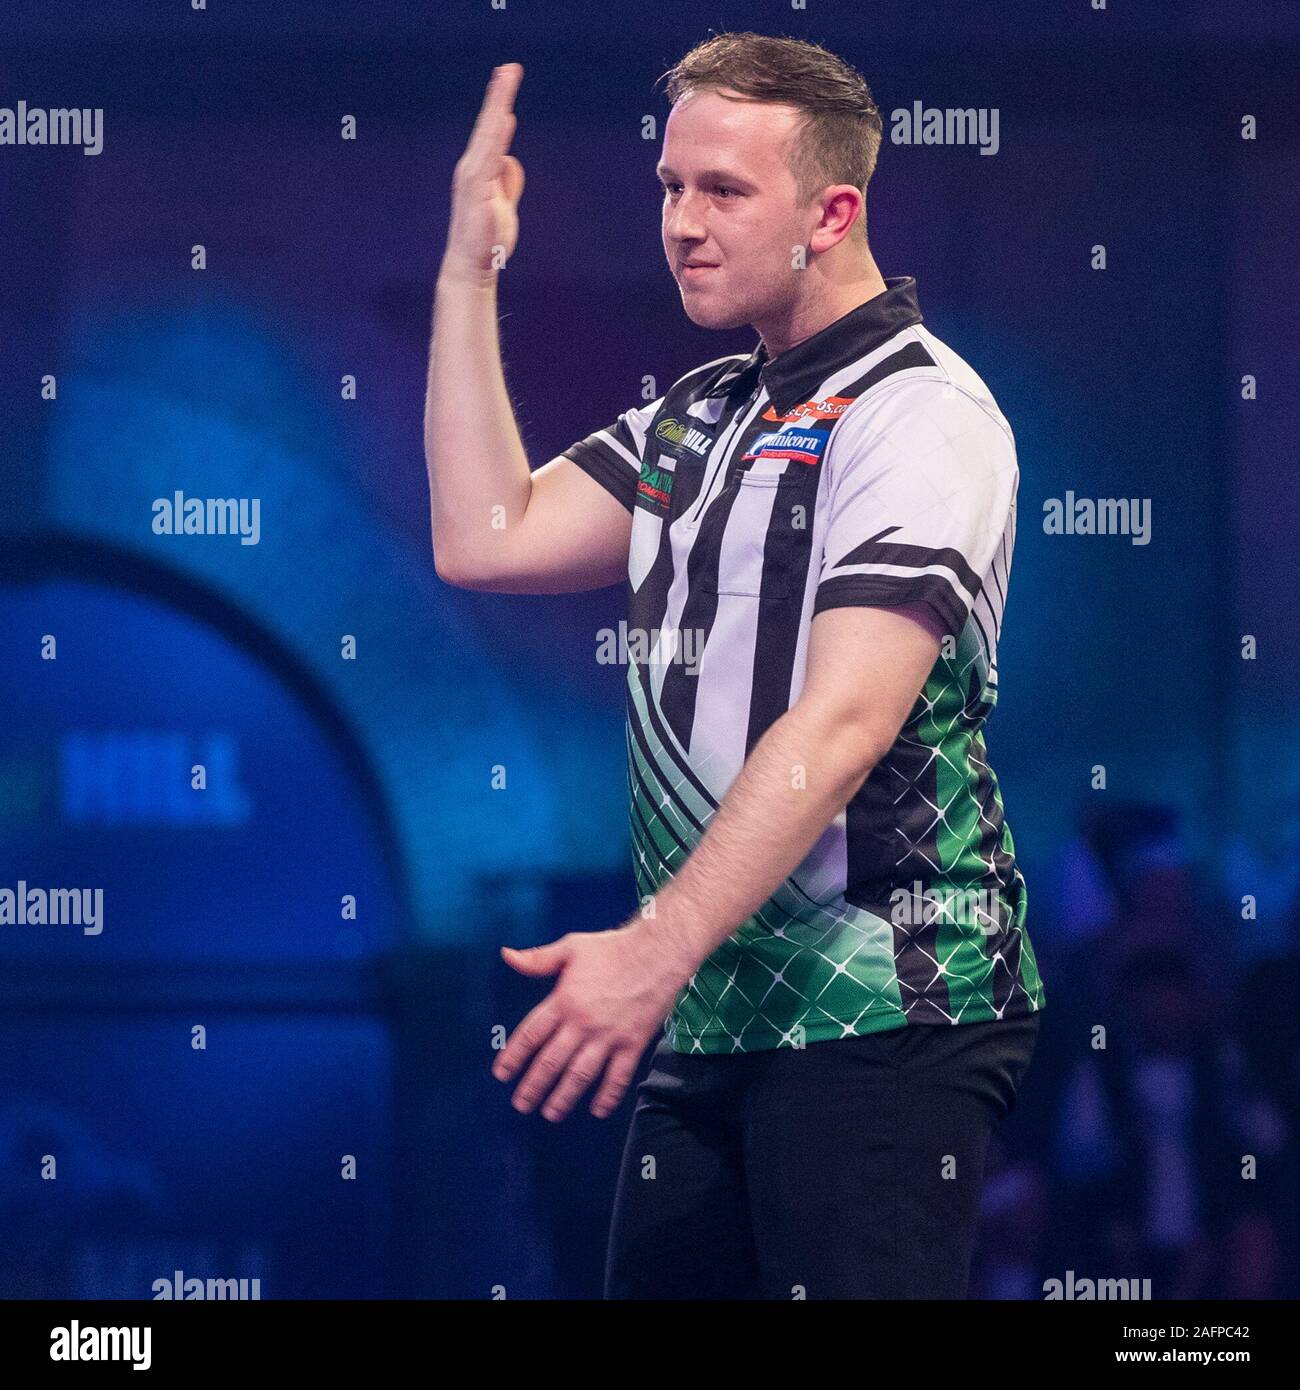 Londen, UK. 16th Dec, 2019. LONDEN, 16-12-2019, Darts player Callan Rydz  during the William Hill, World Championship Darts, PDC. Credit: Pro  Shots/Alamy Live News Stock Photo - Alamy